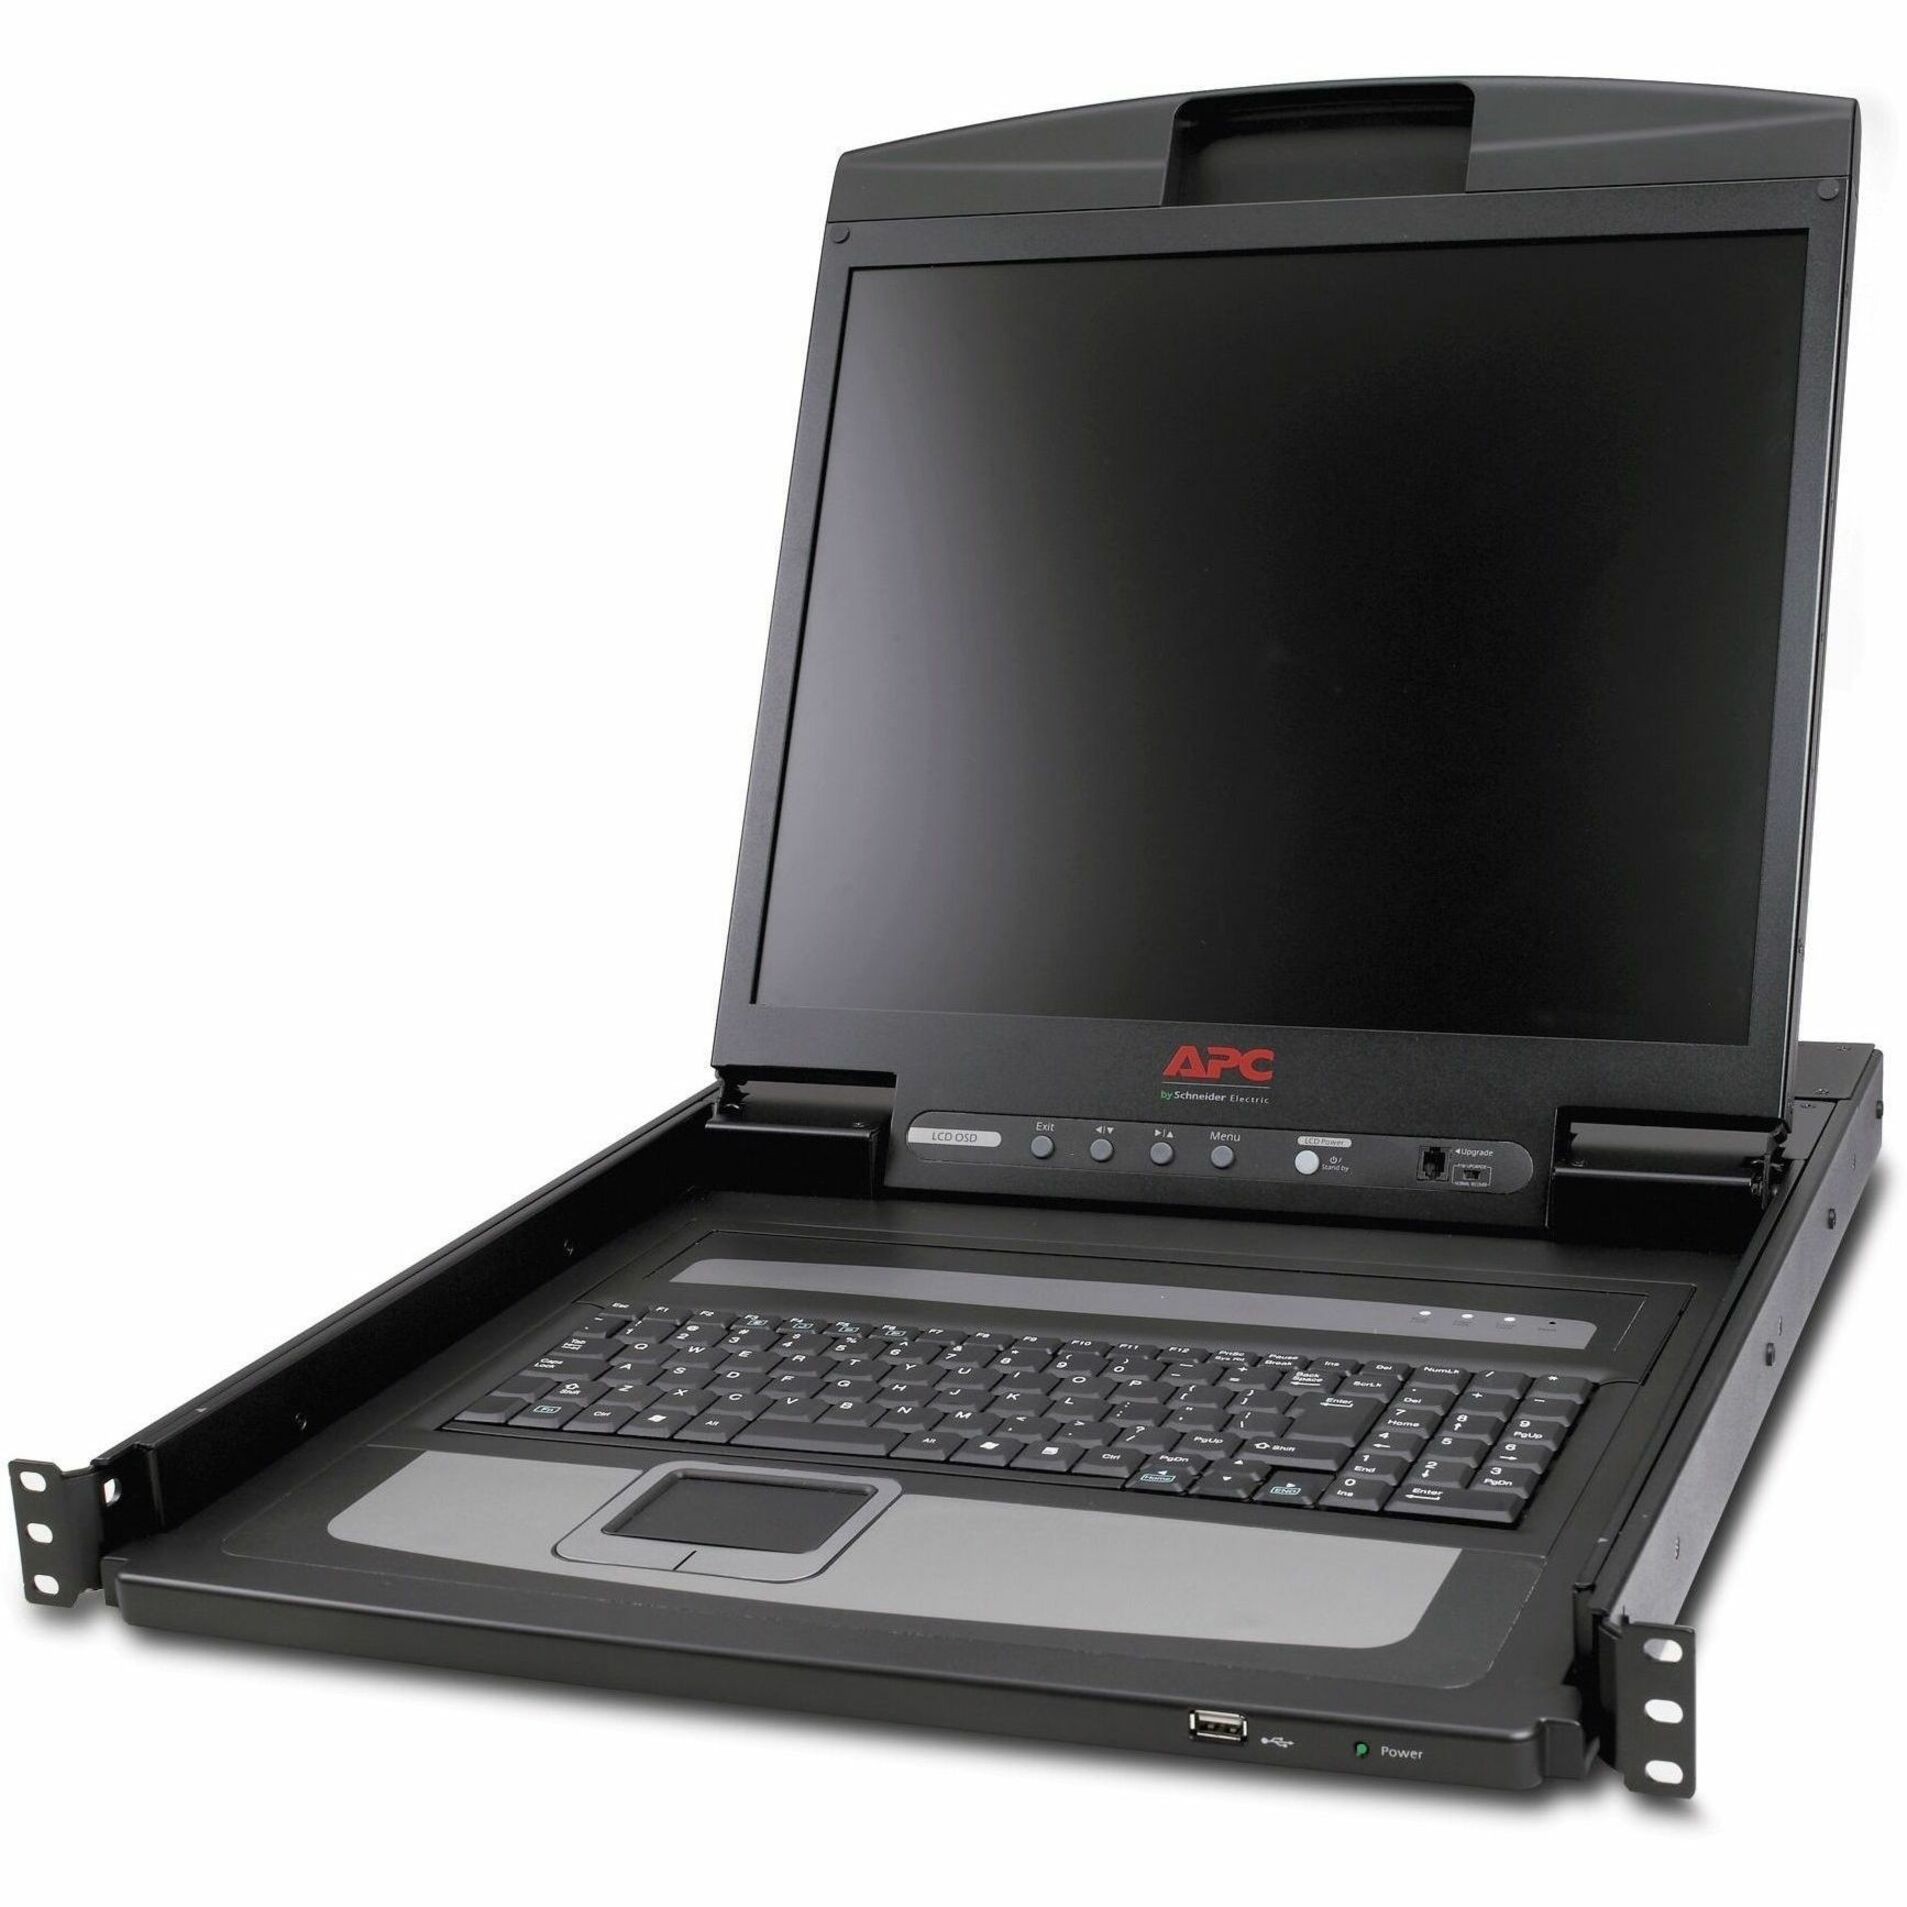 APC AP5719 19" Rack LCD Console - image 1 of 4